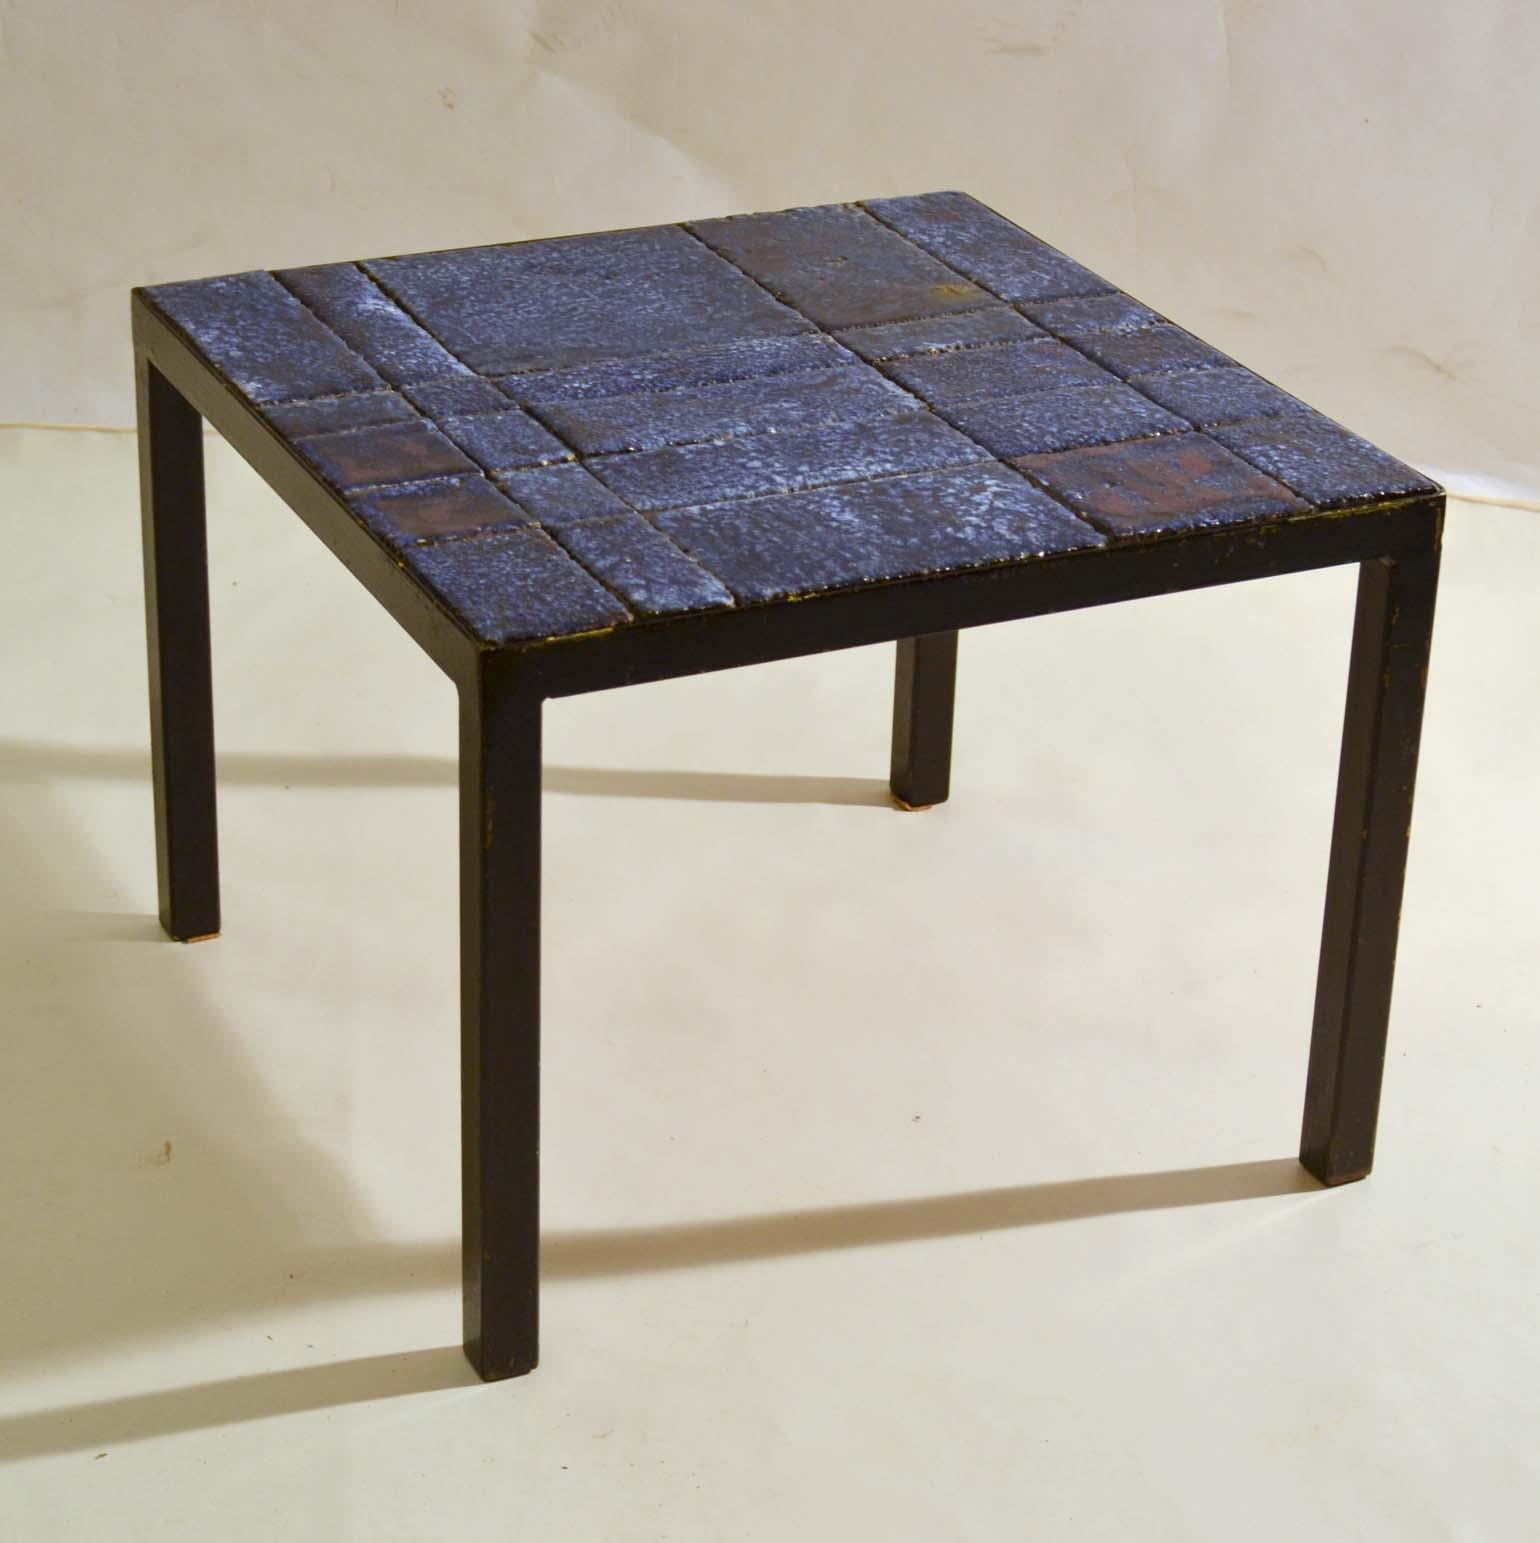 ceramic tile outdoor table